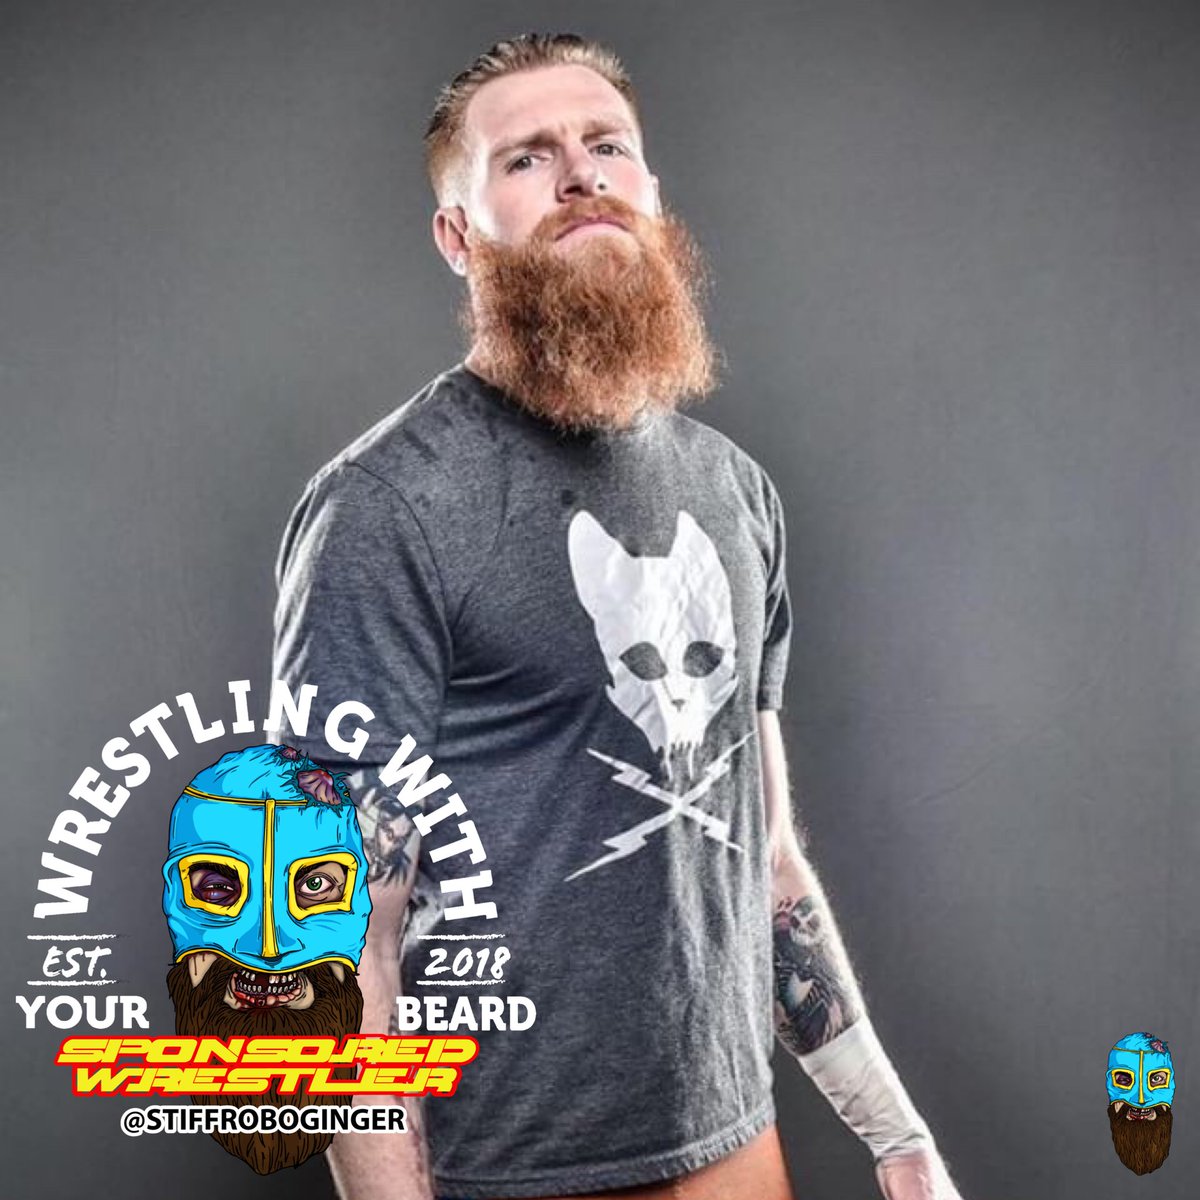 You’ve seen him in @combatzone and @sup_graps just to name a few so Welcome to the Wrestling with Your Beard Family @stiffroboginger Gary Jay! •
•
Use his code “STIFFROBOCHOP” for 15% off at checkout! 
#sponsoredathlete #stiffrobochop #garyjay #combatzonewrestling #supgraps